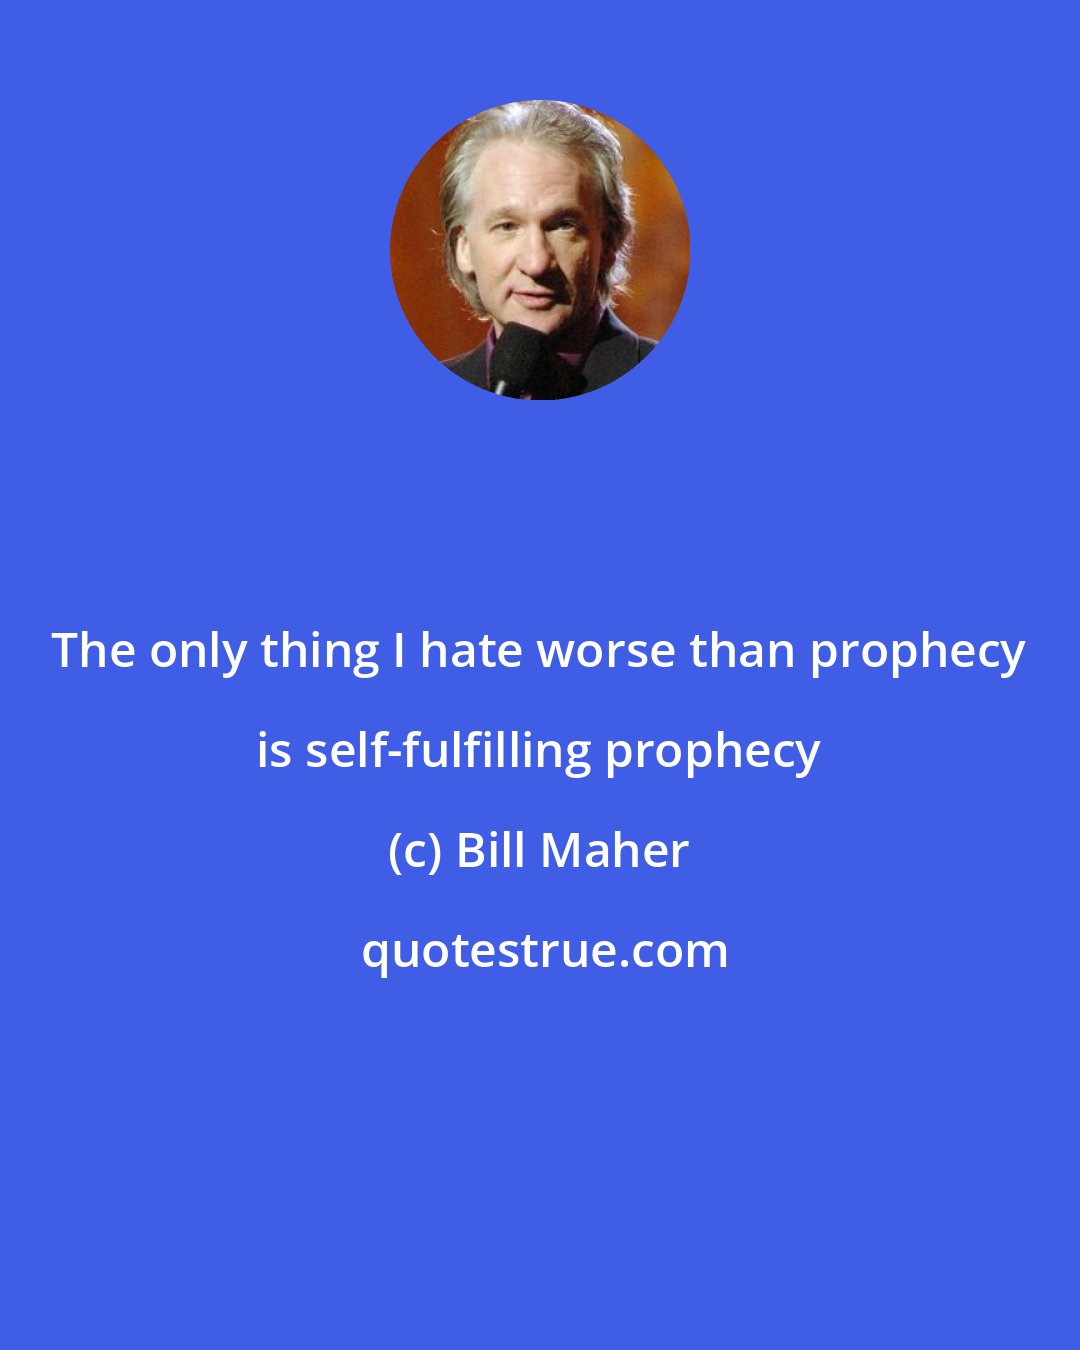 Bill Maher: The only thing I hate worse than prophecy is self-fulfilling prophecy